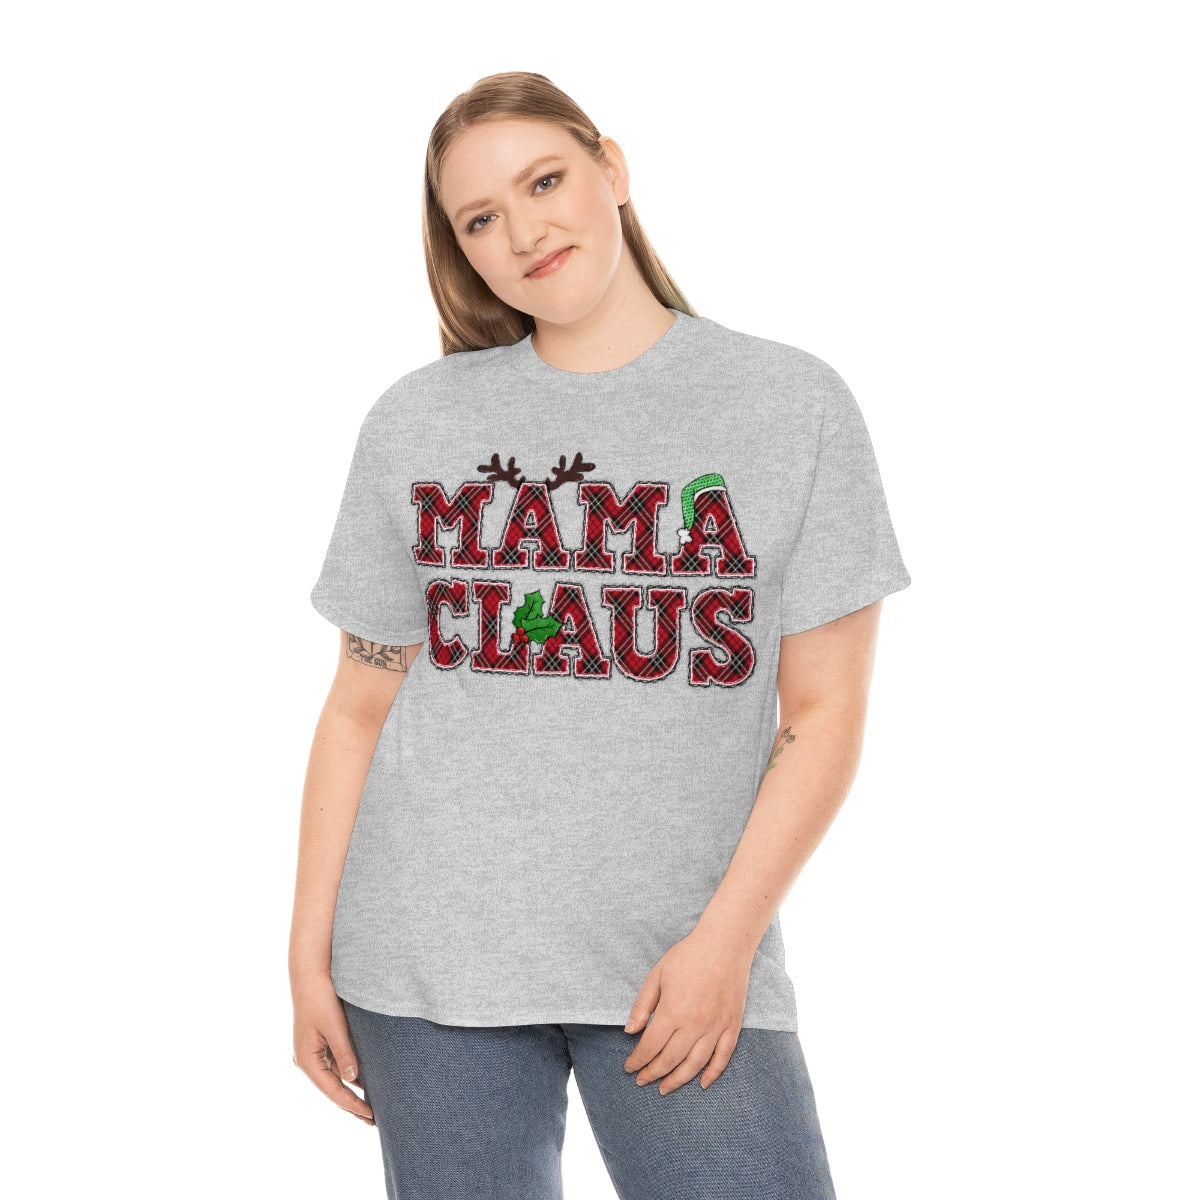 Family Name Clause T-shirts